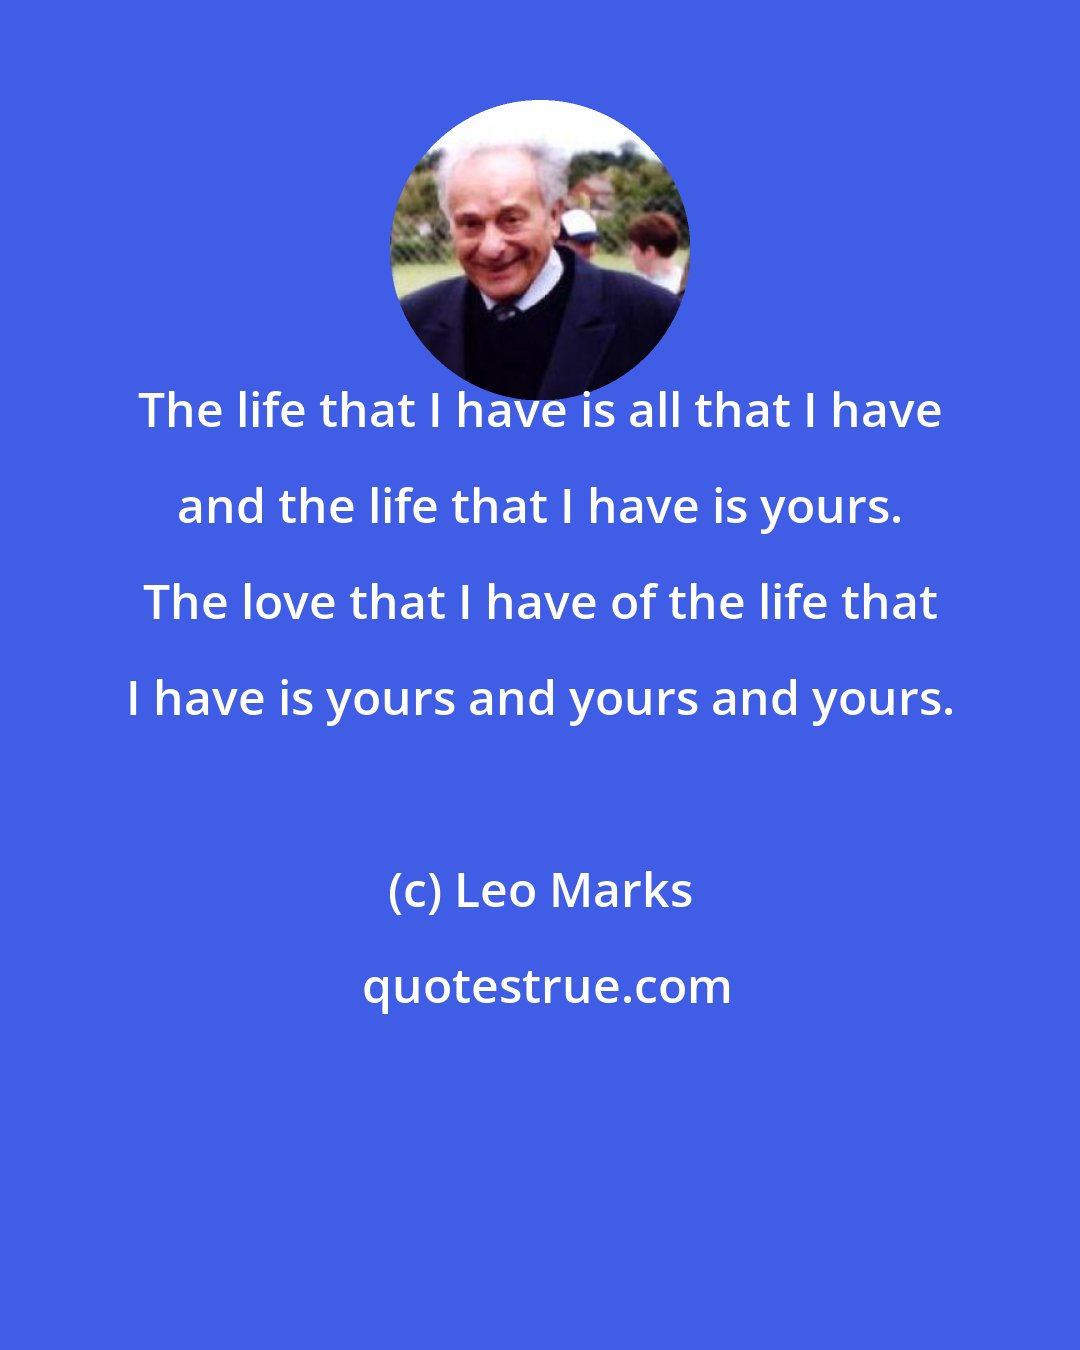 Leo Marks: The life that I have is all that I have and the life that I have is yours. The love that I have of the life that I have is yours and yours and yours.